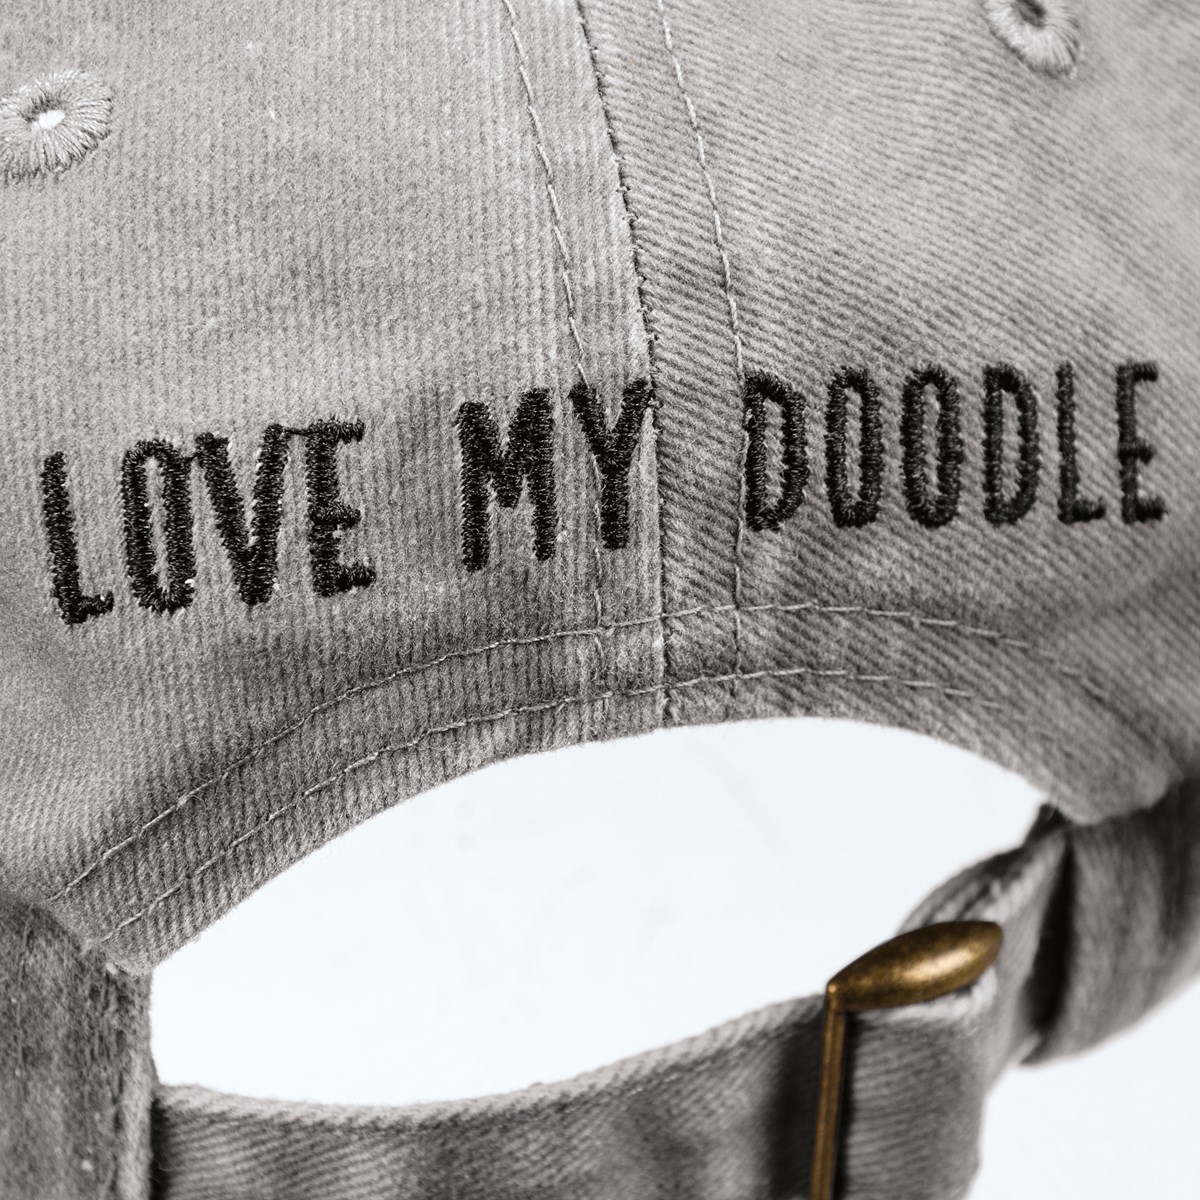 Baseball Cap - Love My Doodle - One Size Fits Most - Cotton, Metal